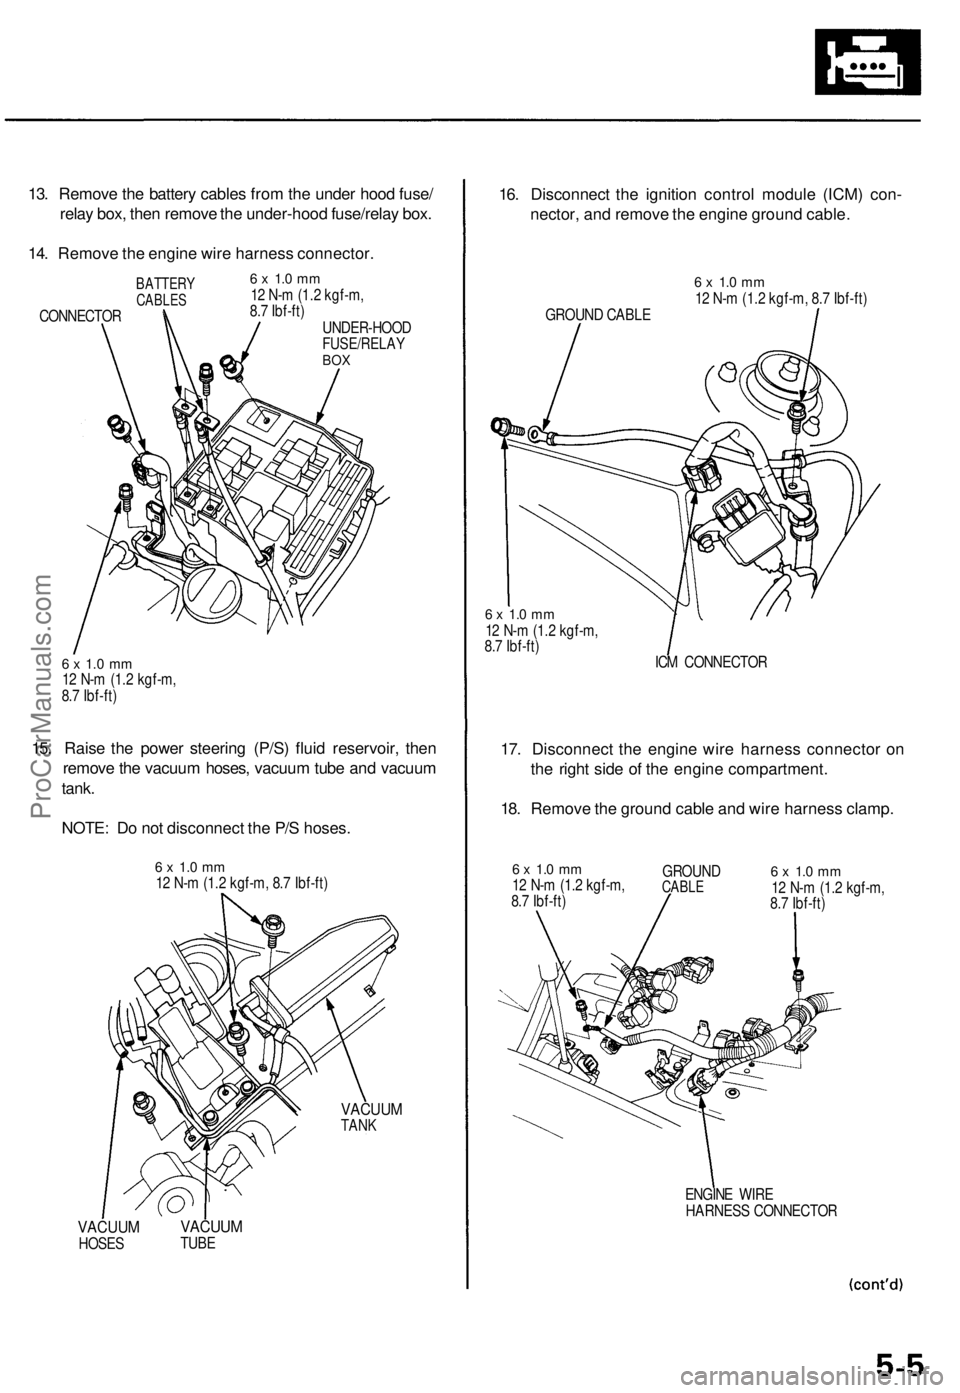 ACURA TL 1995  Service Service Manual 
13. Remove the battery cables from the under hood fuse/

relay box, then remove the under-hood fuse/relay box.

14. Remove the engine wire harness connector.

BATTERY

CABLES

CONNECTOR 
6 x 1.0 mm

